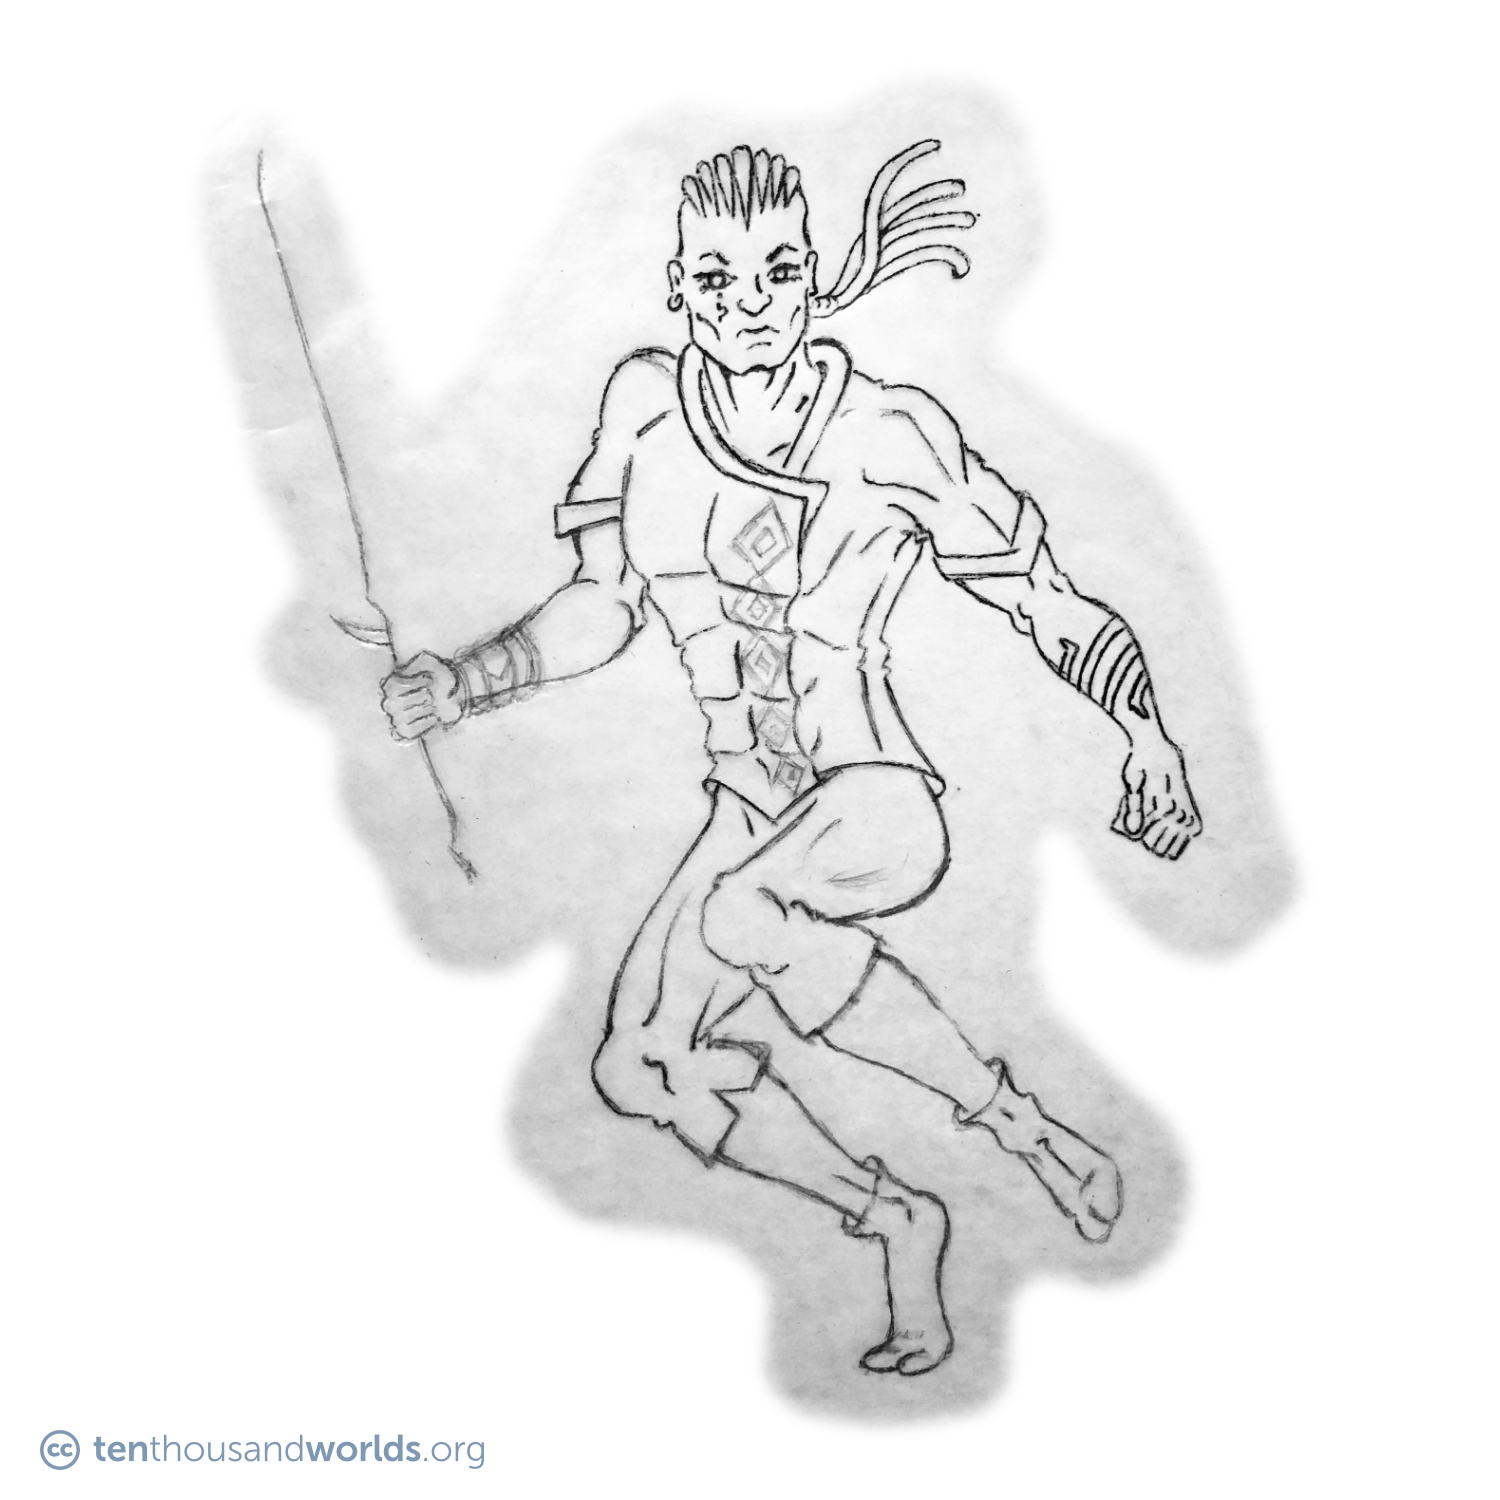 An ink outline of a man in mid-leap holding a sword. He wears knee-length trousers and an asymmetrical short-sleeved shirt. He has facial and forearm tattoos, the sides of his head are shaved, and the rest of his hair is styled into long braids which fly out behind him.